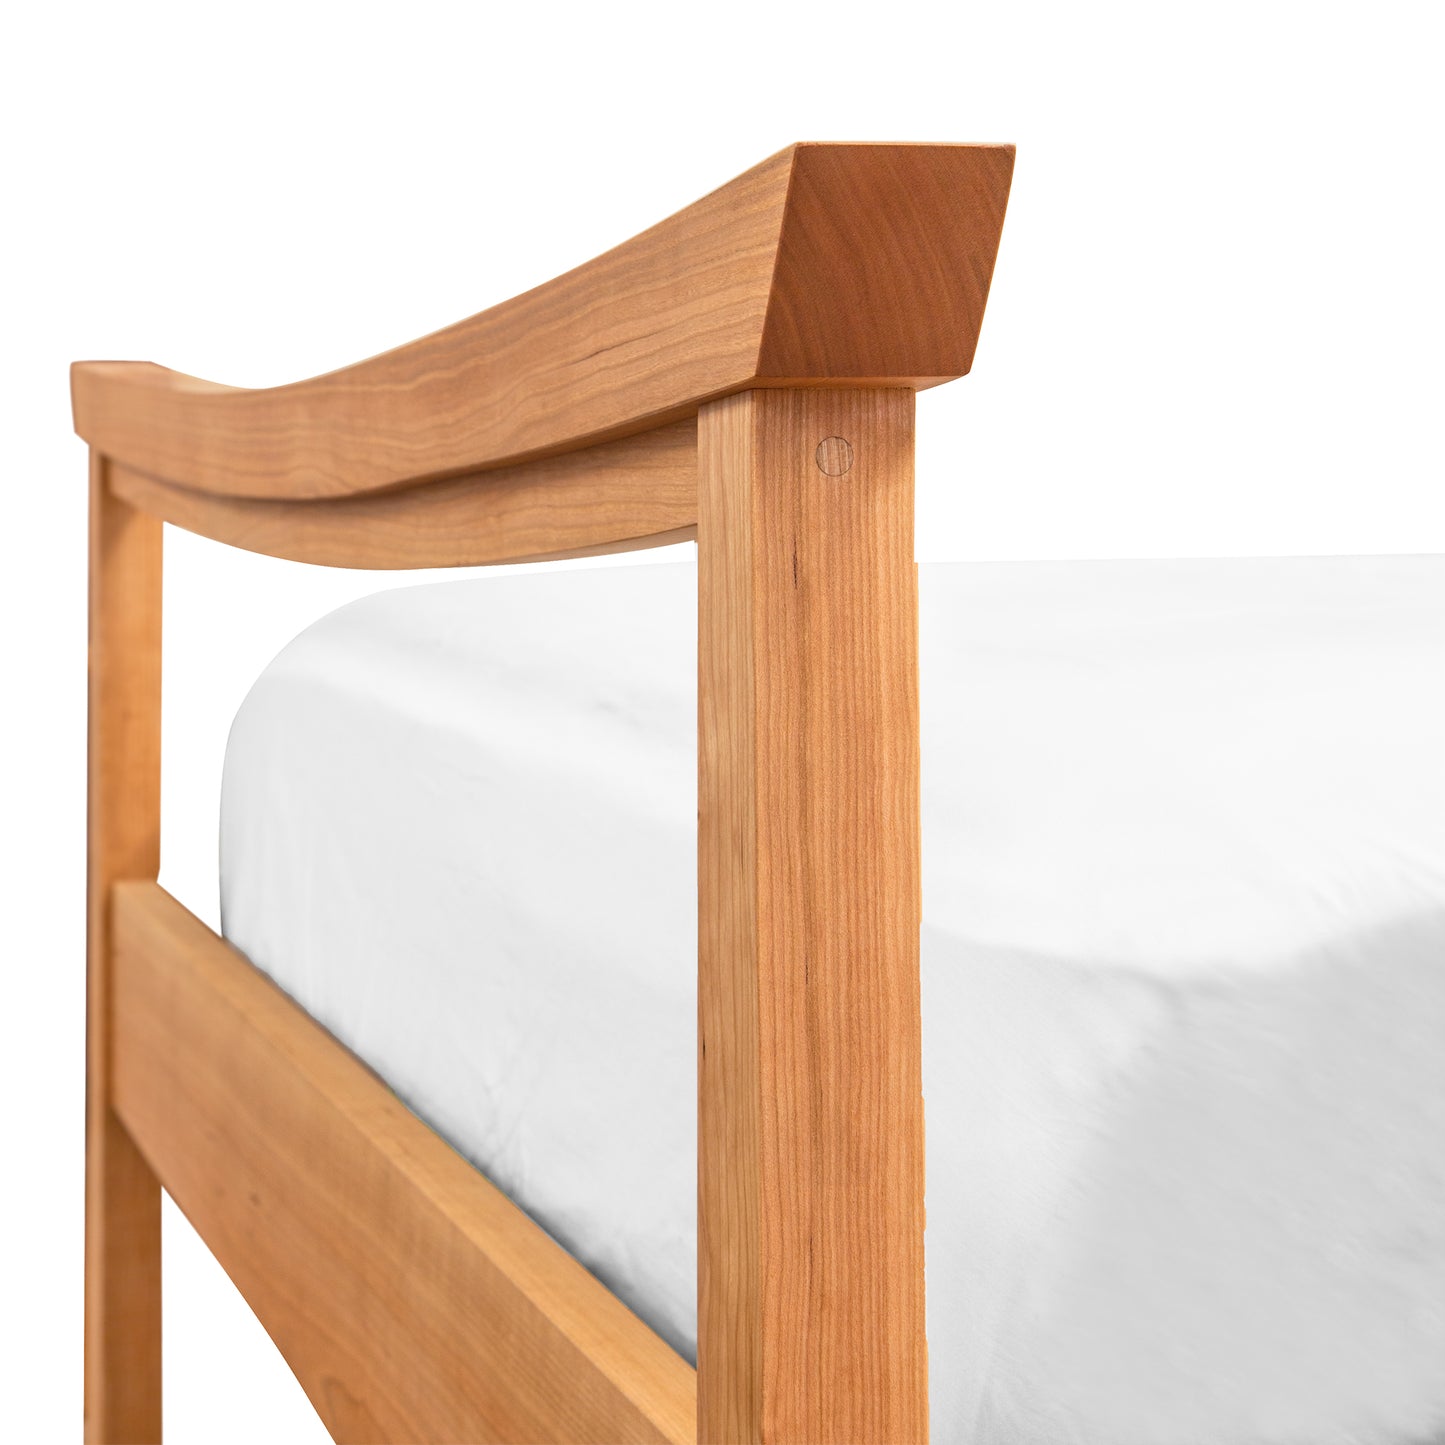 A Maple Corner Woodworks Cherry Moon Pagoda Bed frame corner with a clean white mattress.